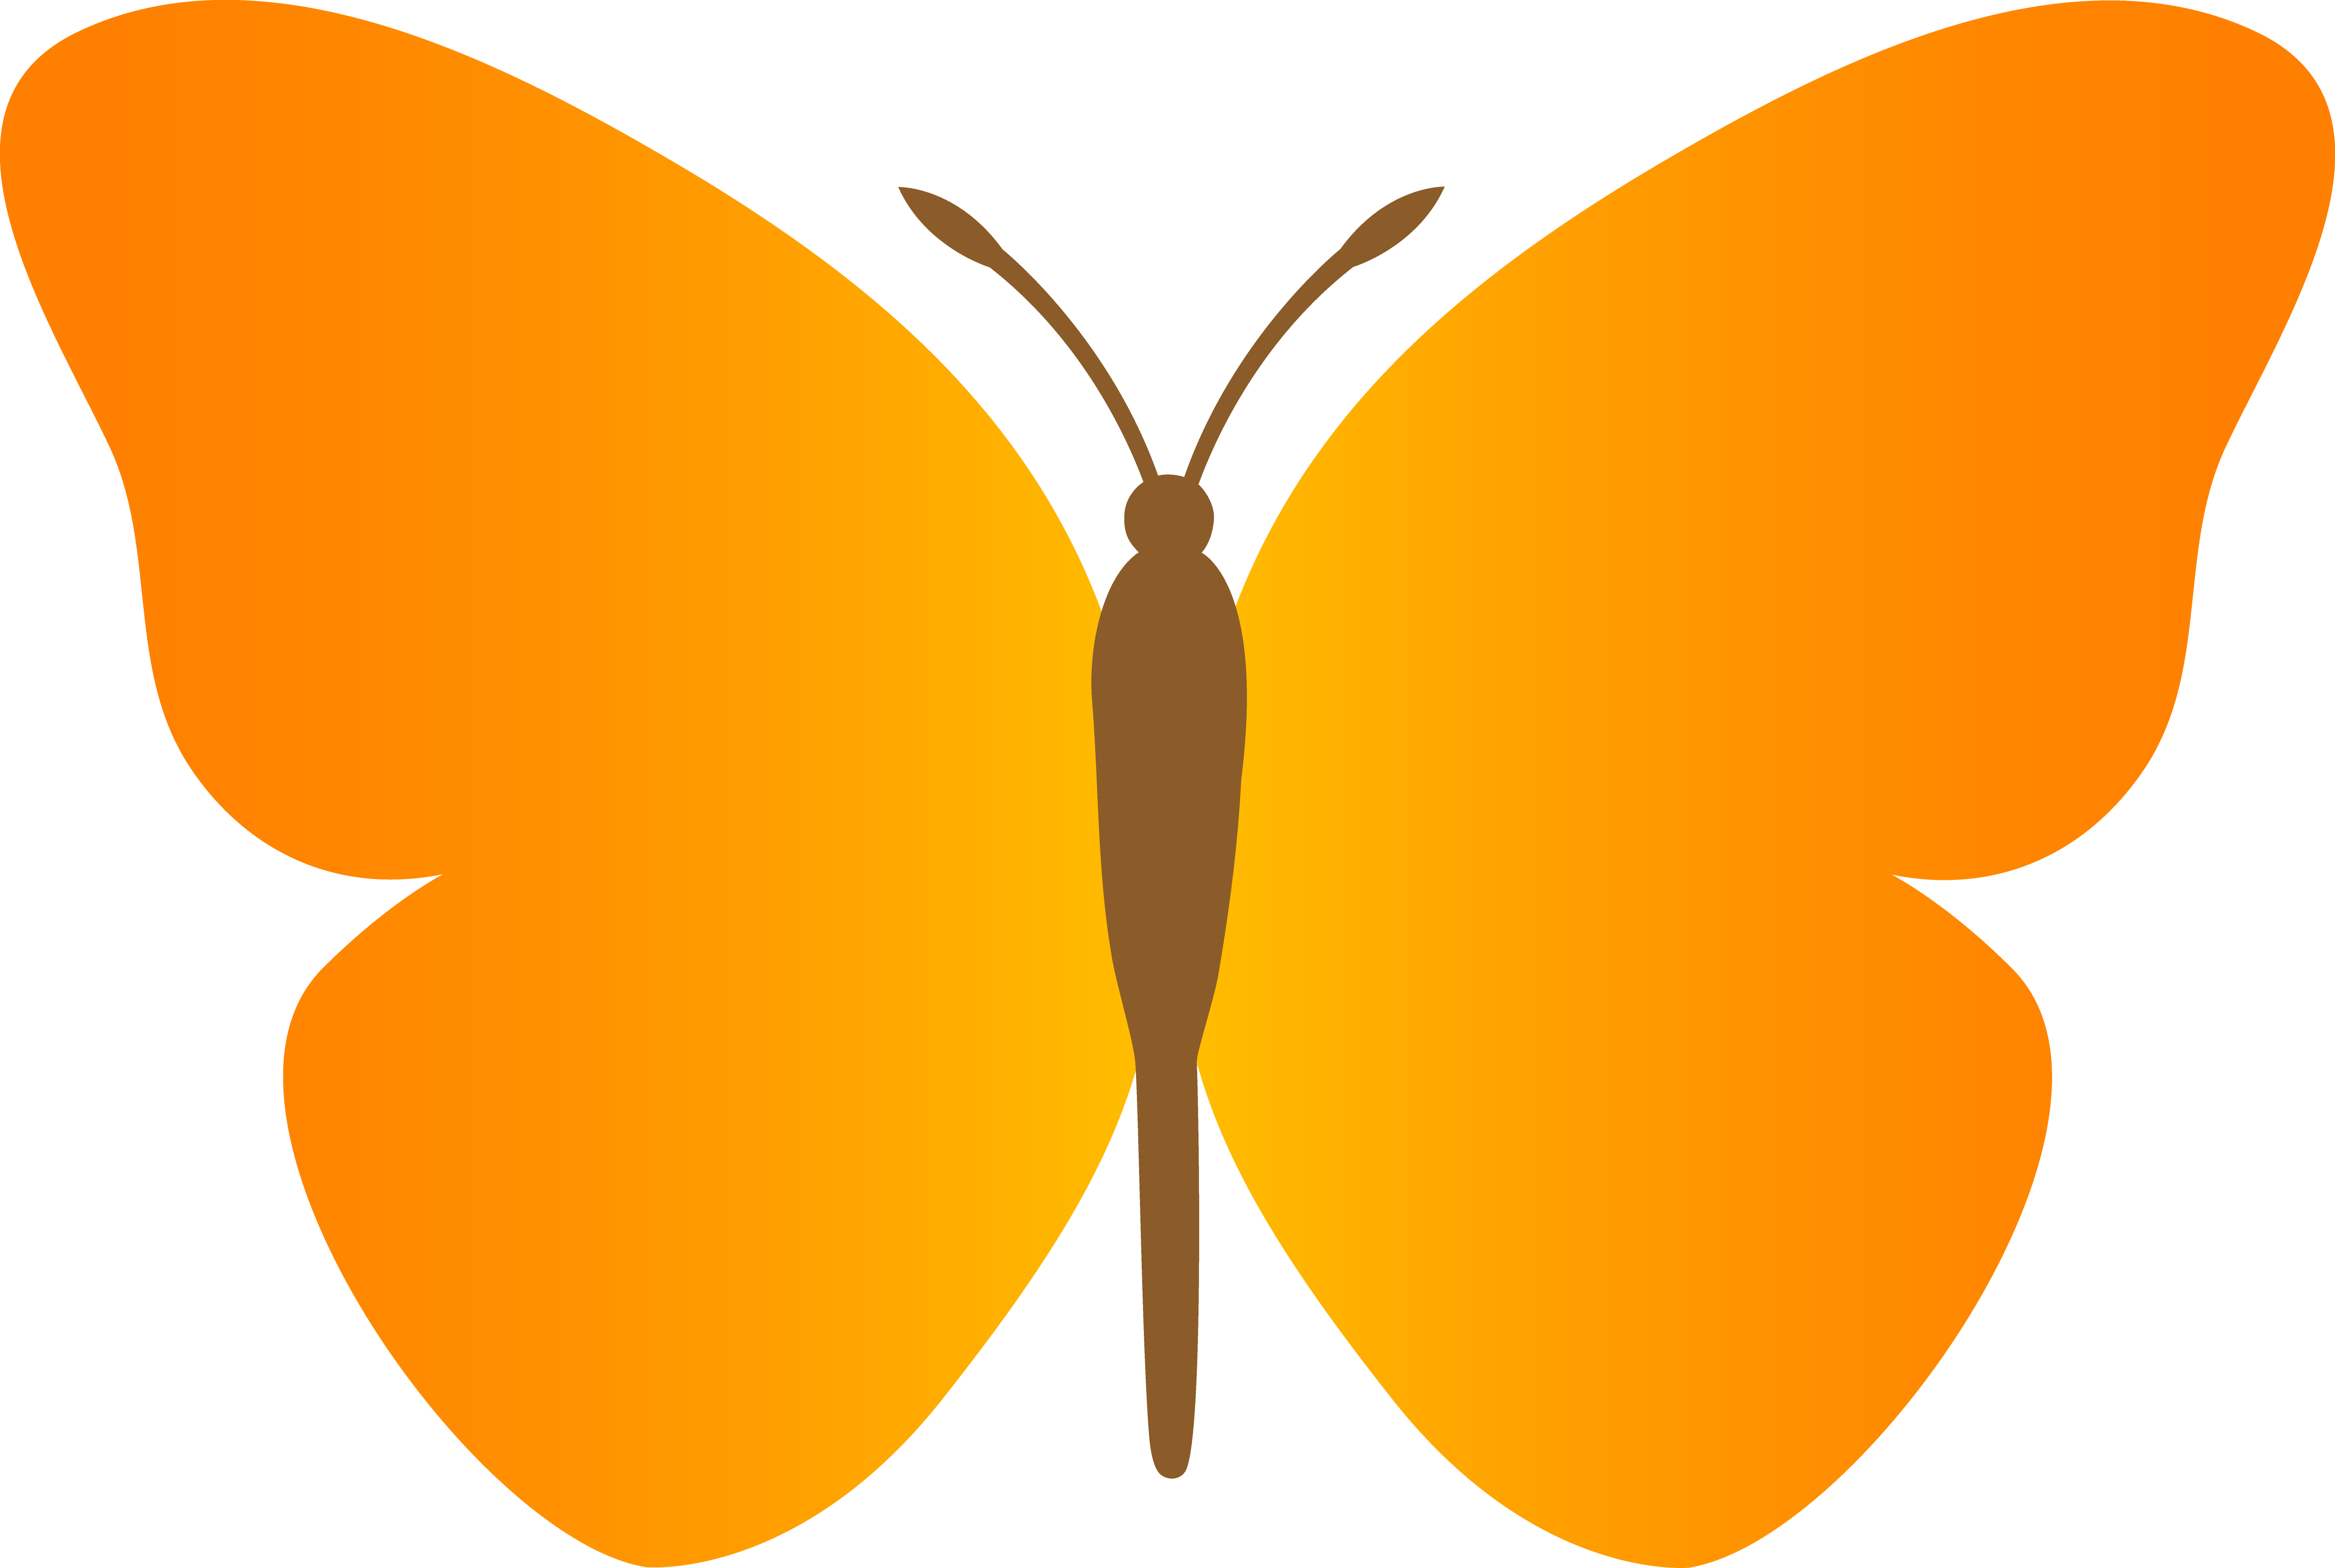 Free Butterfly Images Free, Download Free Clip Art, Free.